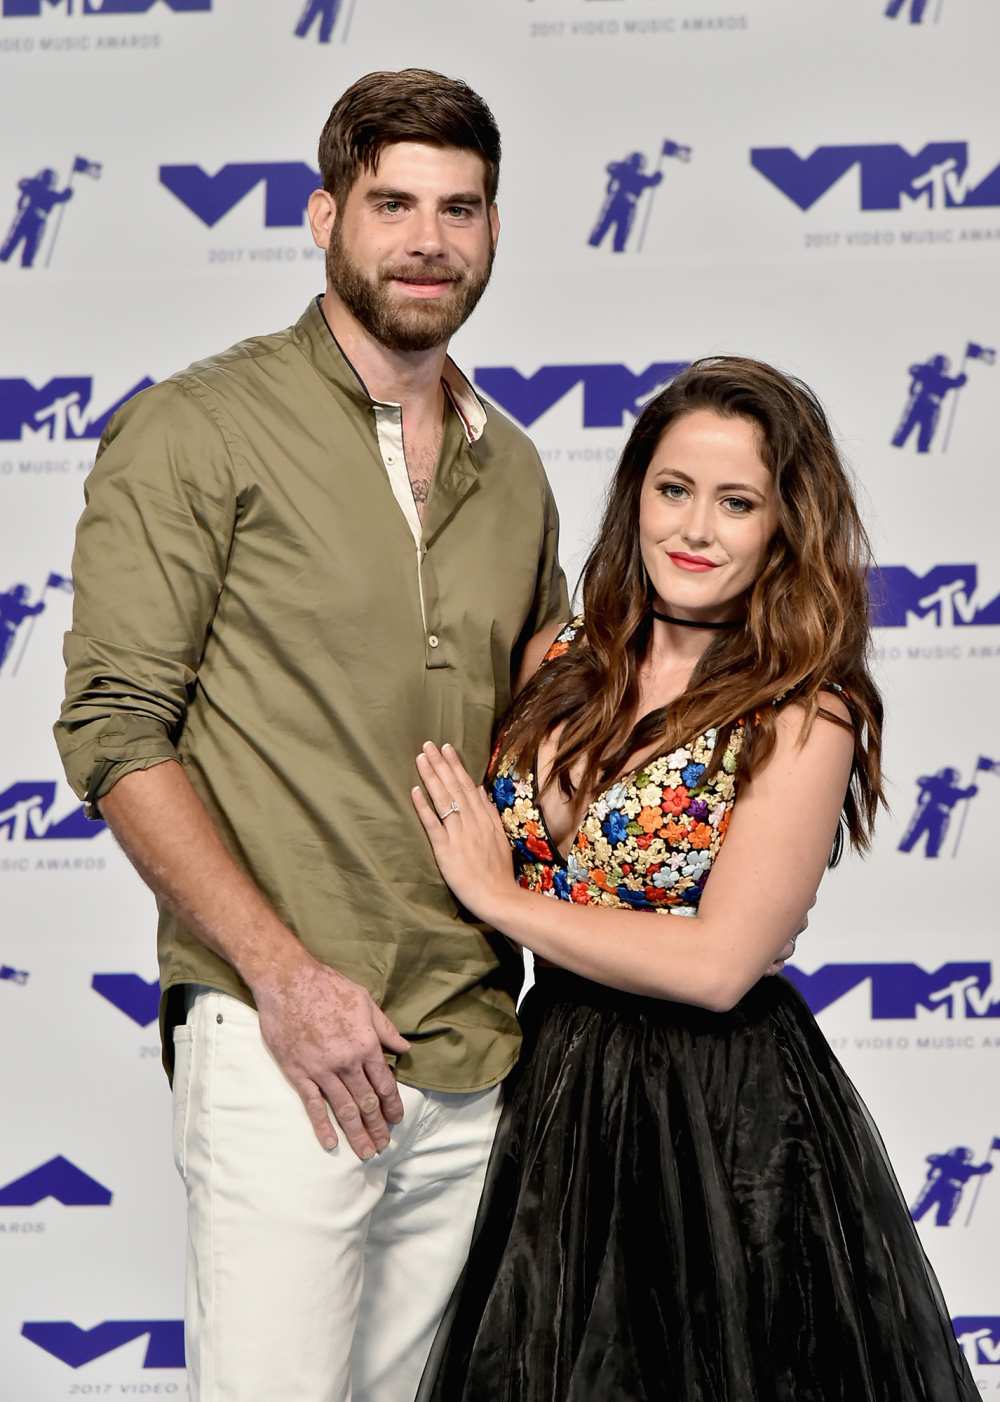 ‘Teen Mom 2’ Recap: Jenelle Evans Opens Up About Her 911 Call on David Eason